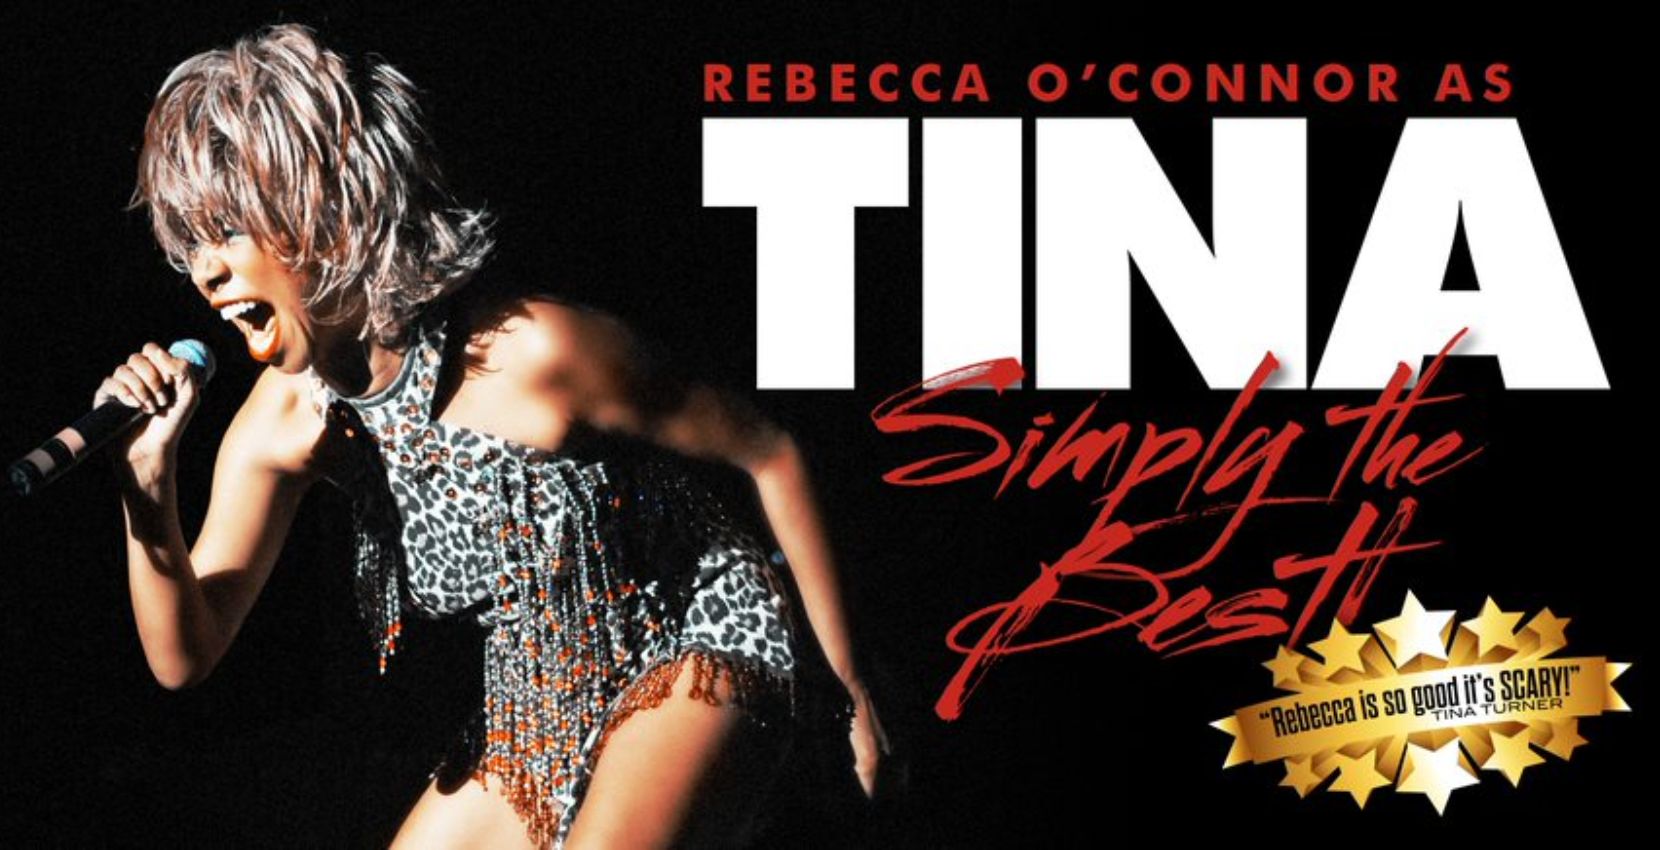 SIMPLY THE BEST Rebecca O’Connor as Tina Turner  live on stage at Siamsa Tíre Theatre, Tralee.